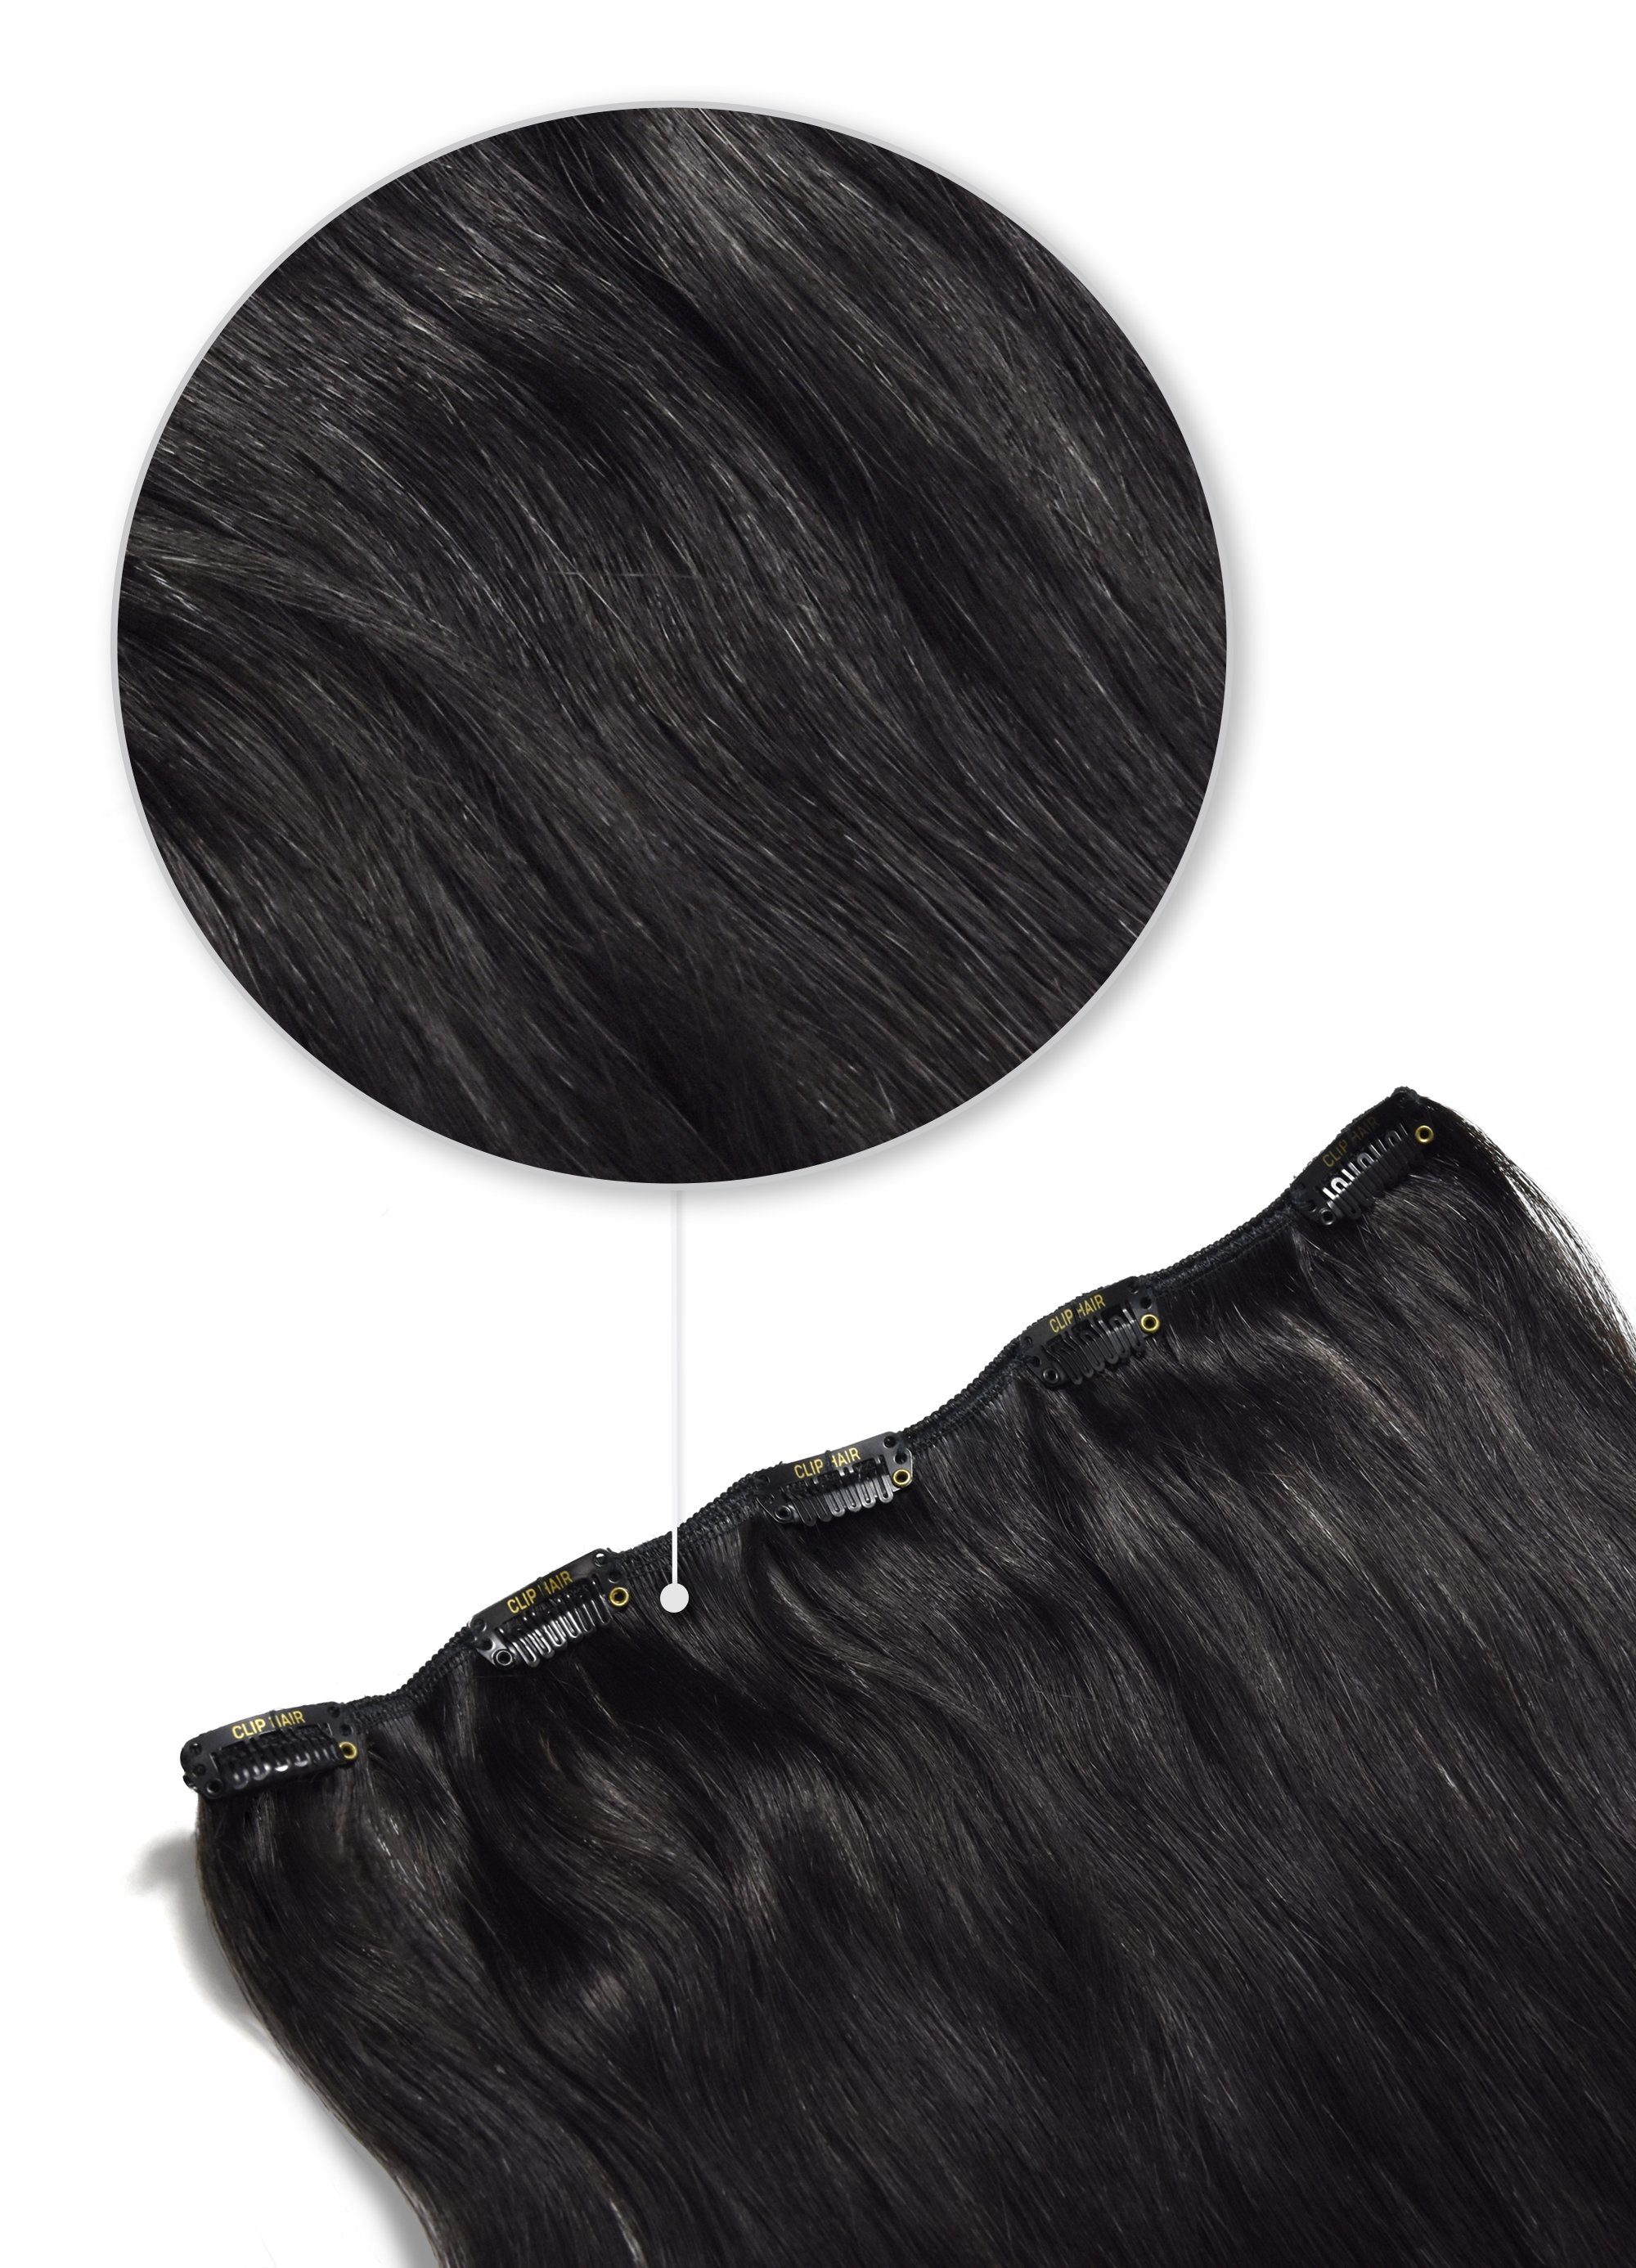 Shop Black Clip In Hair Extensions at Cliphair US | Cliphair US